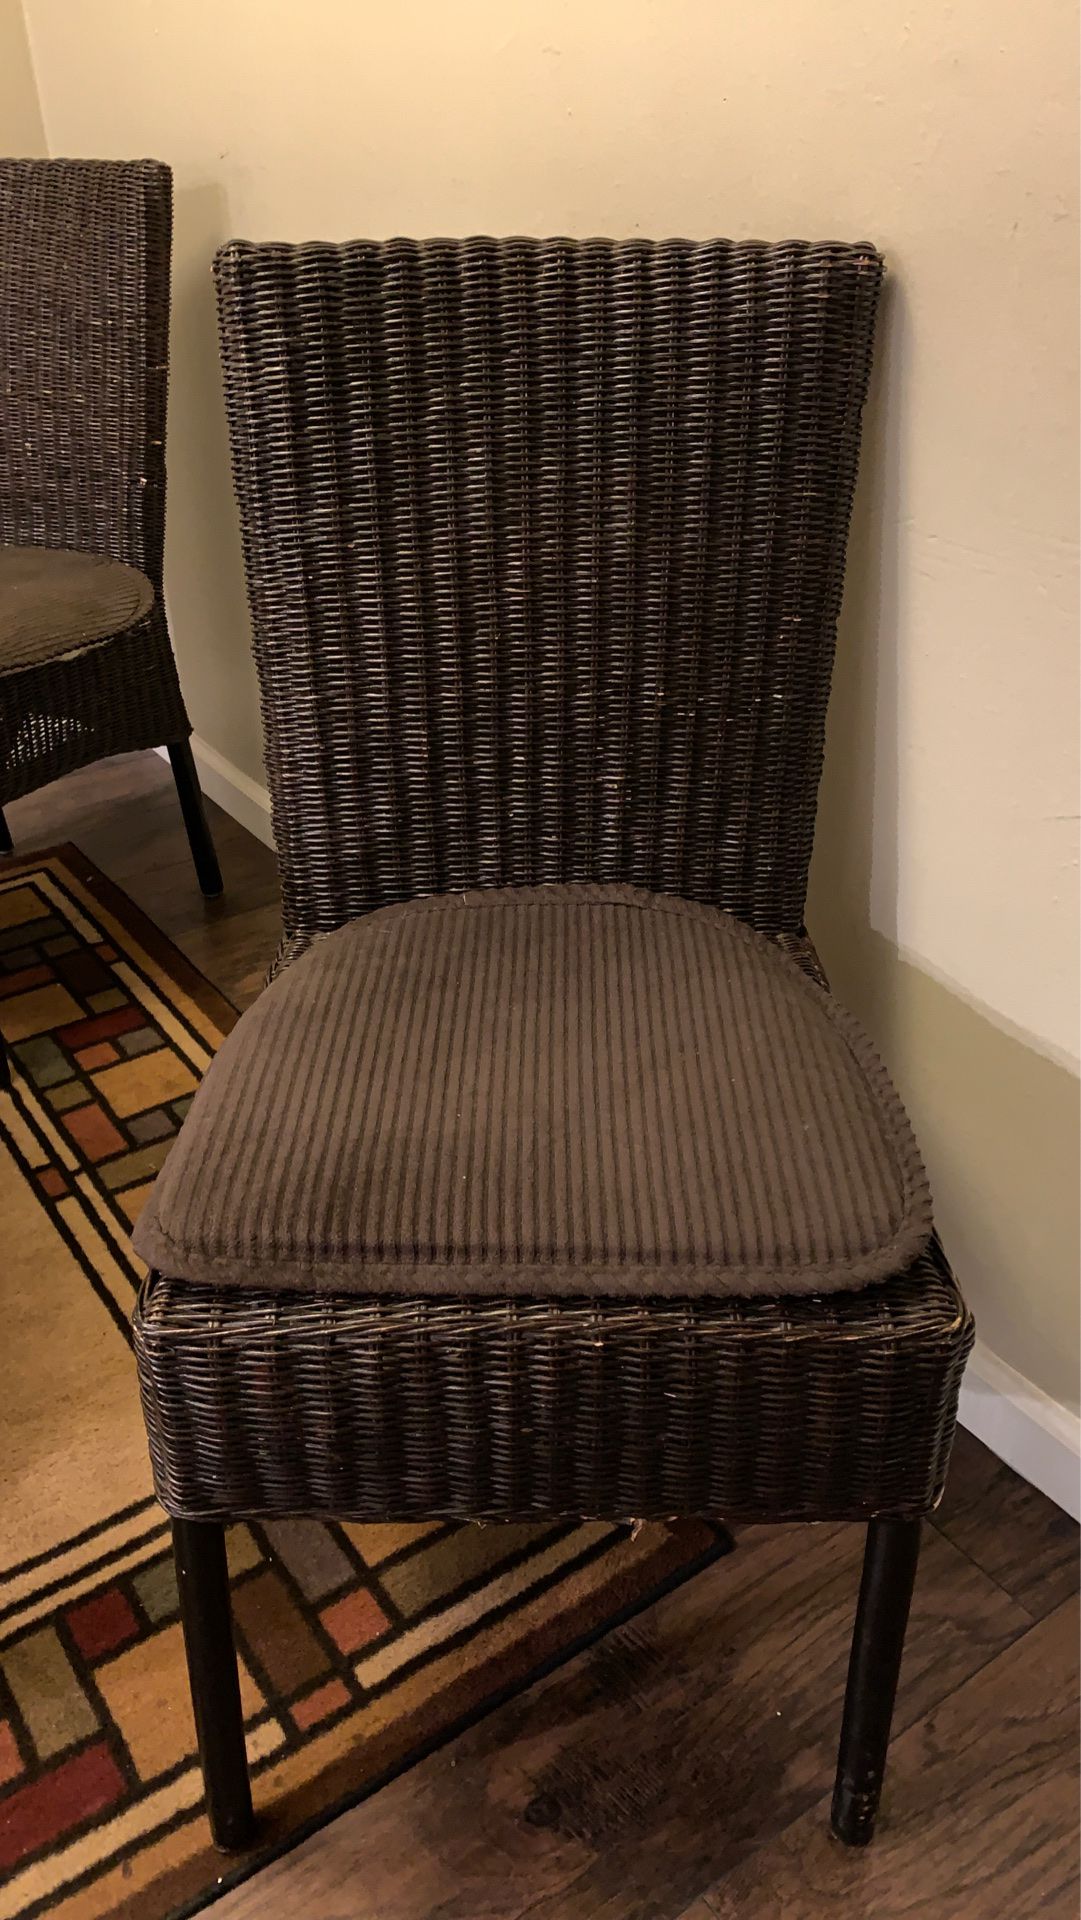 Set of 4 wicker chairs